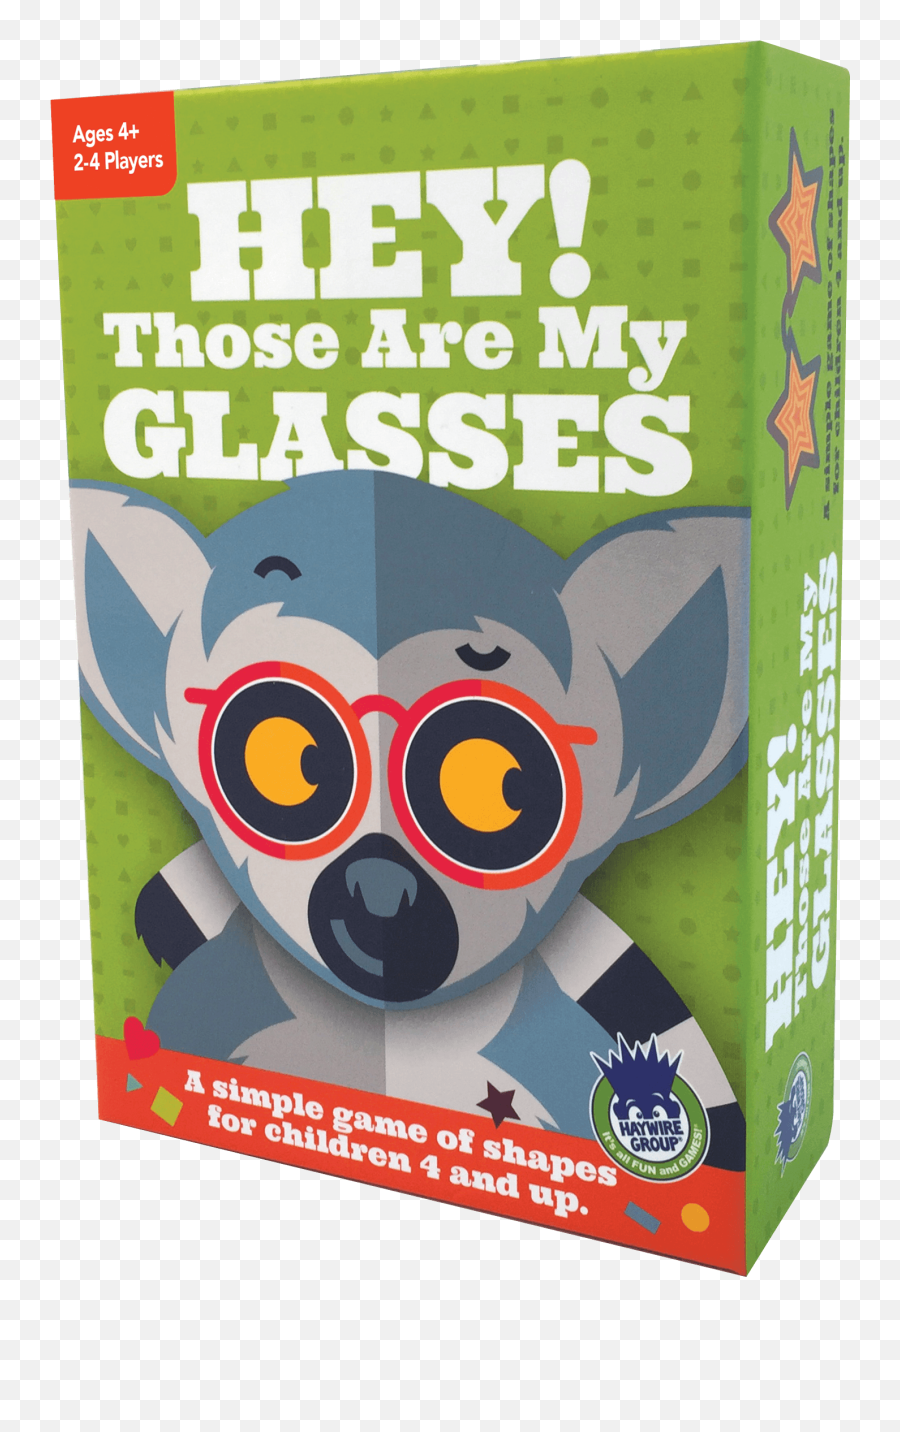 Hey Those Are My Glasses Card Game By Hasbro Inc Emoji,Guess The Emoji Pig + 9